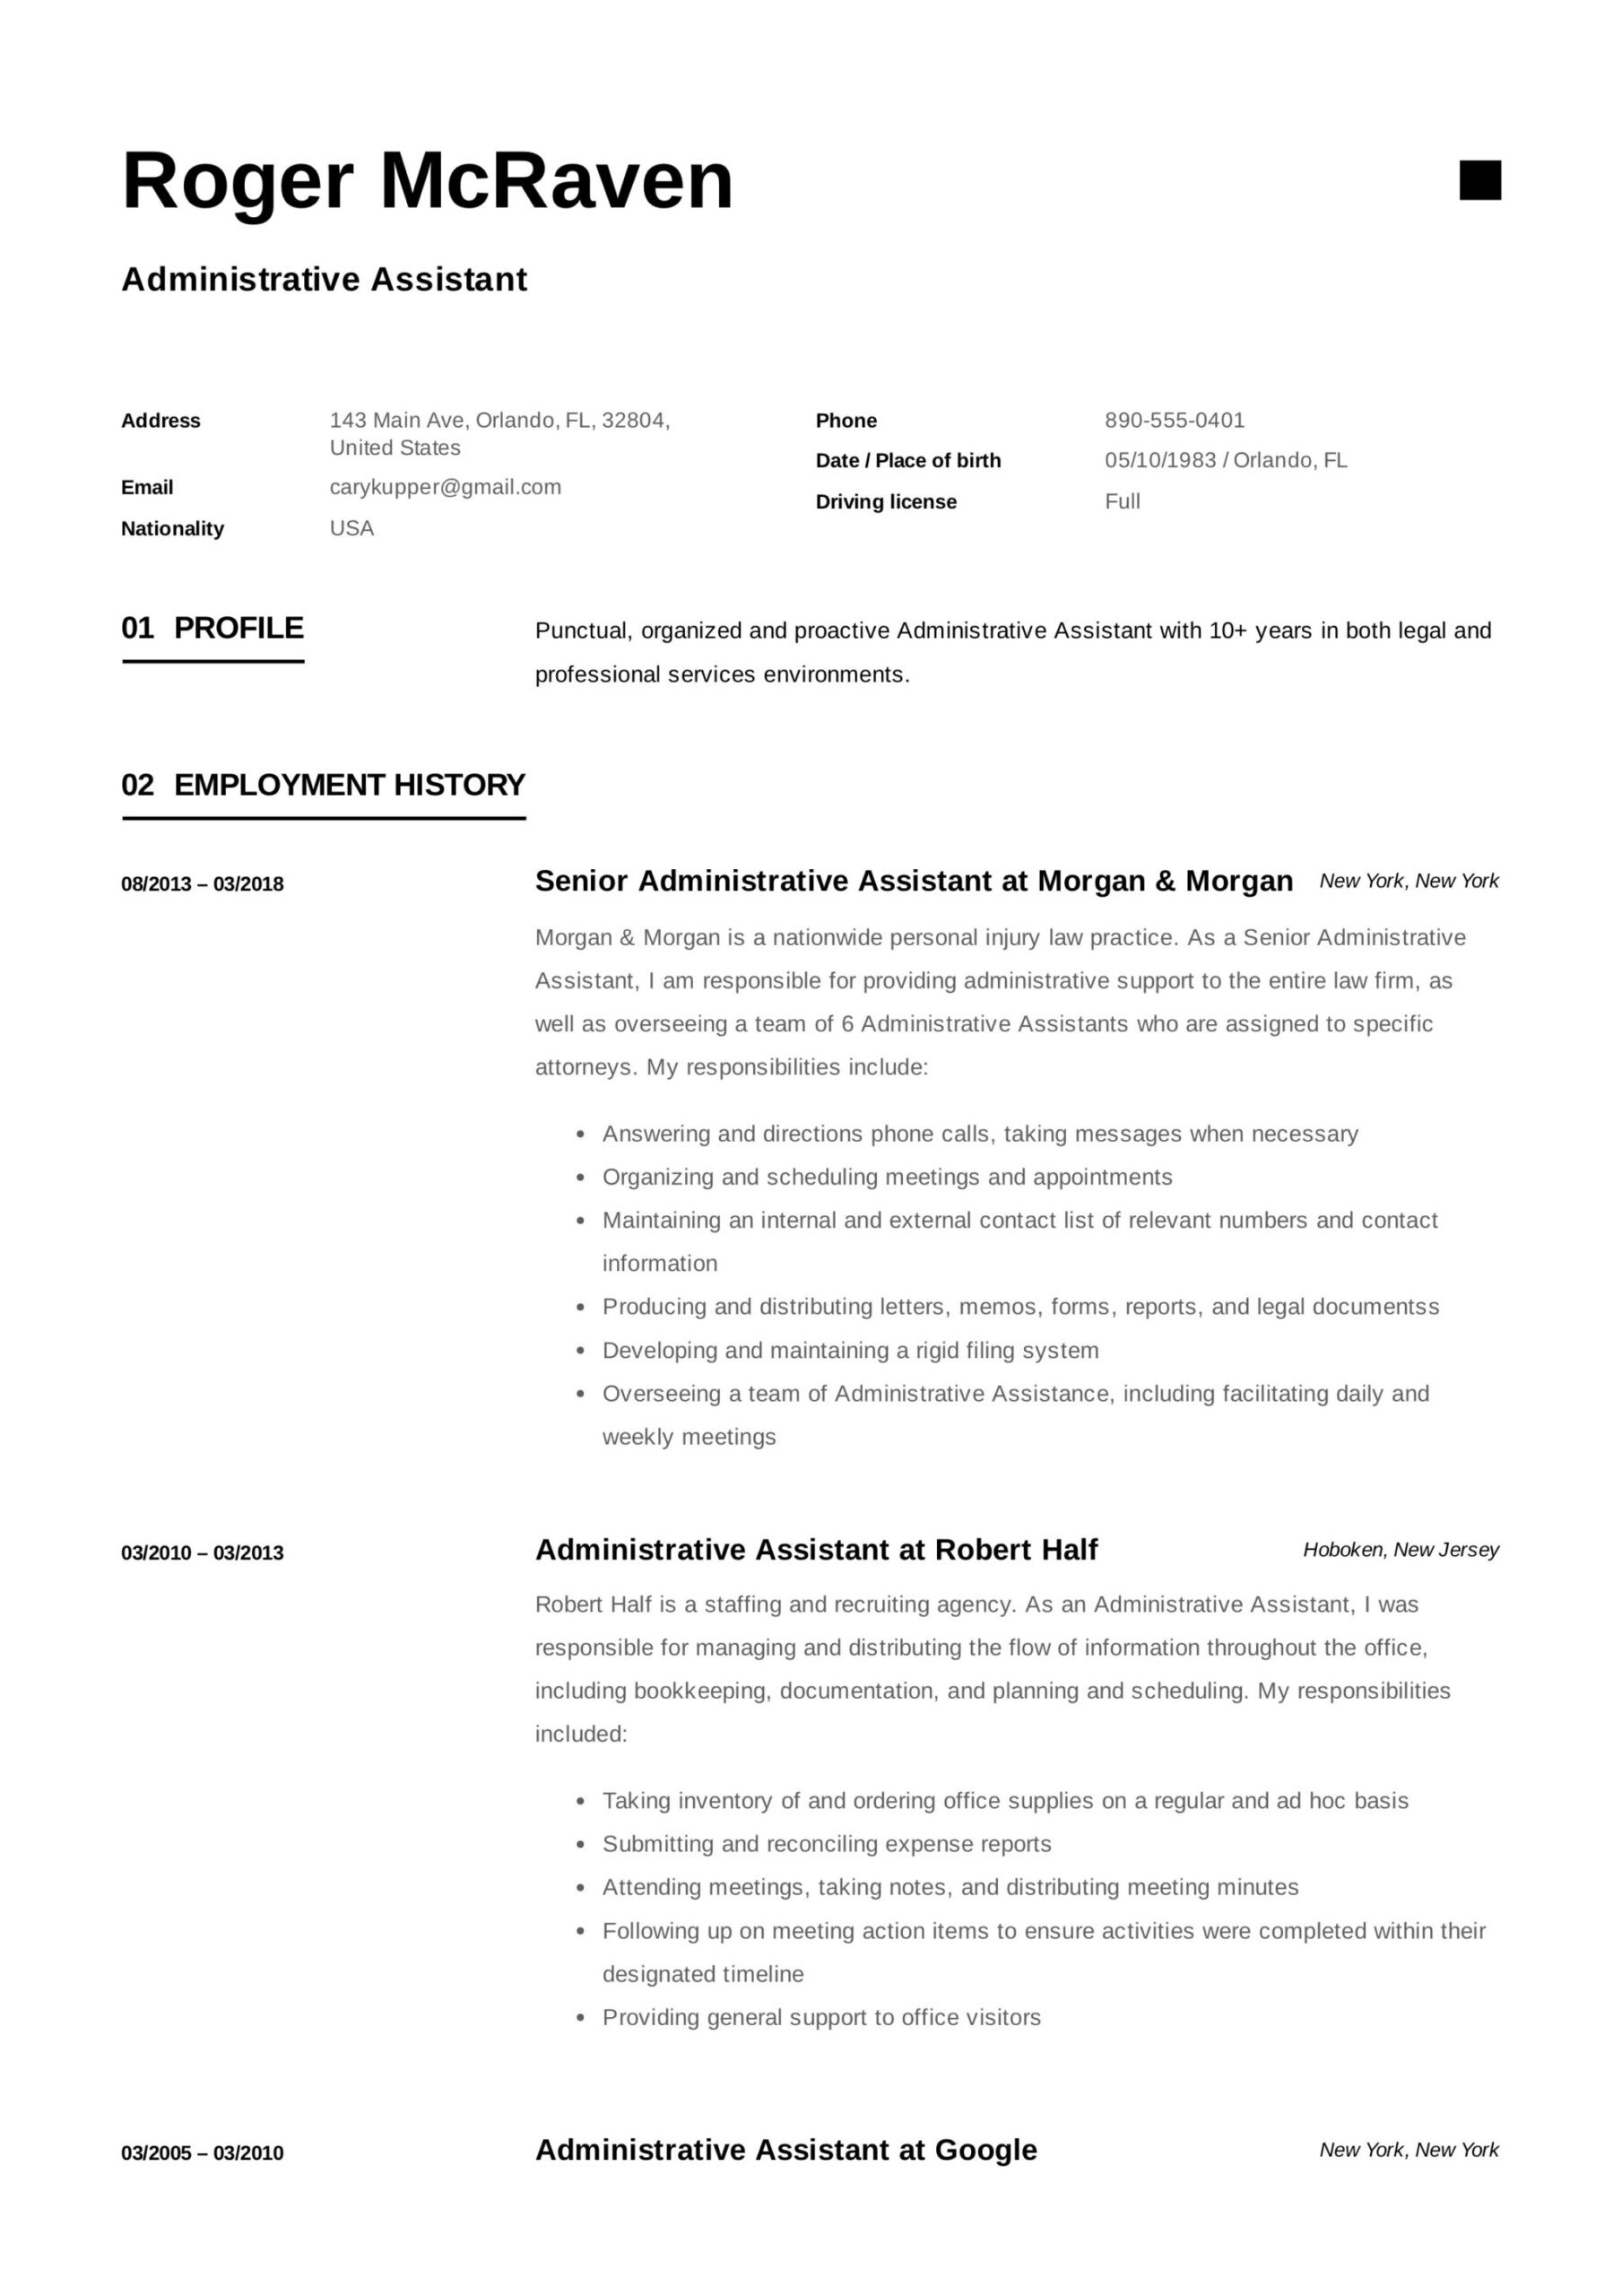 Sample Resume Profile for Administrative assistant Administrative Law Examples